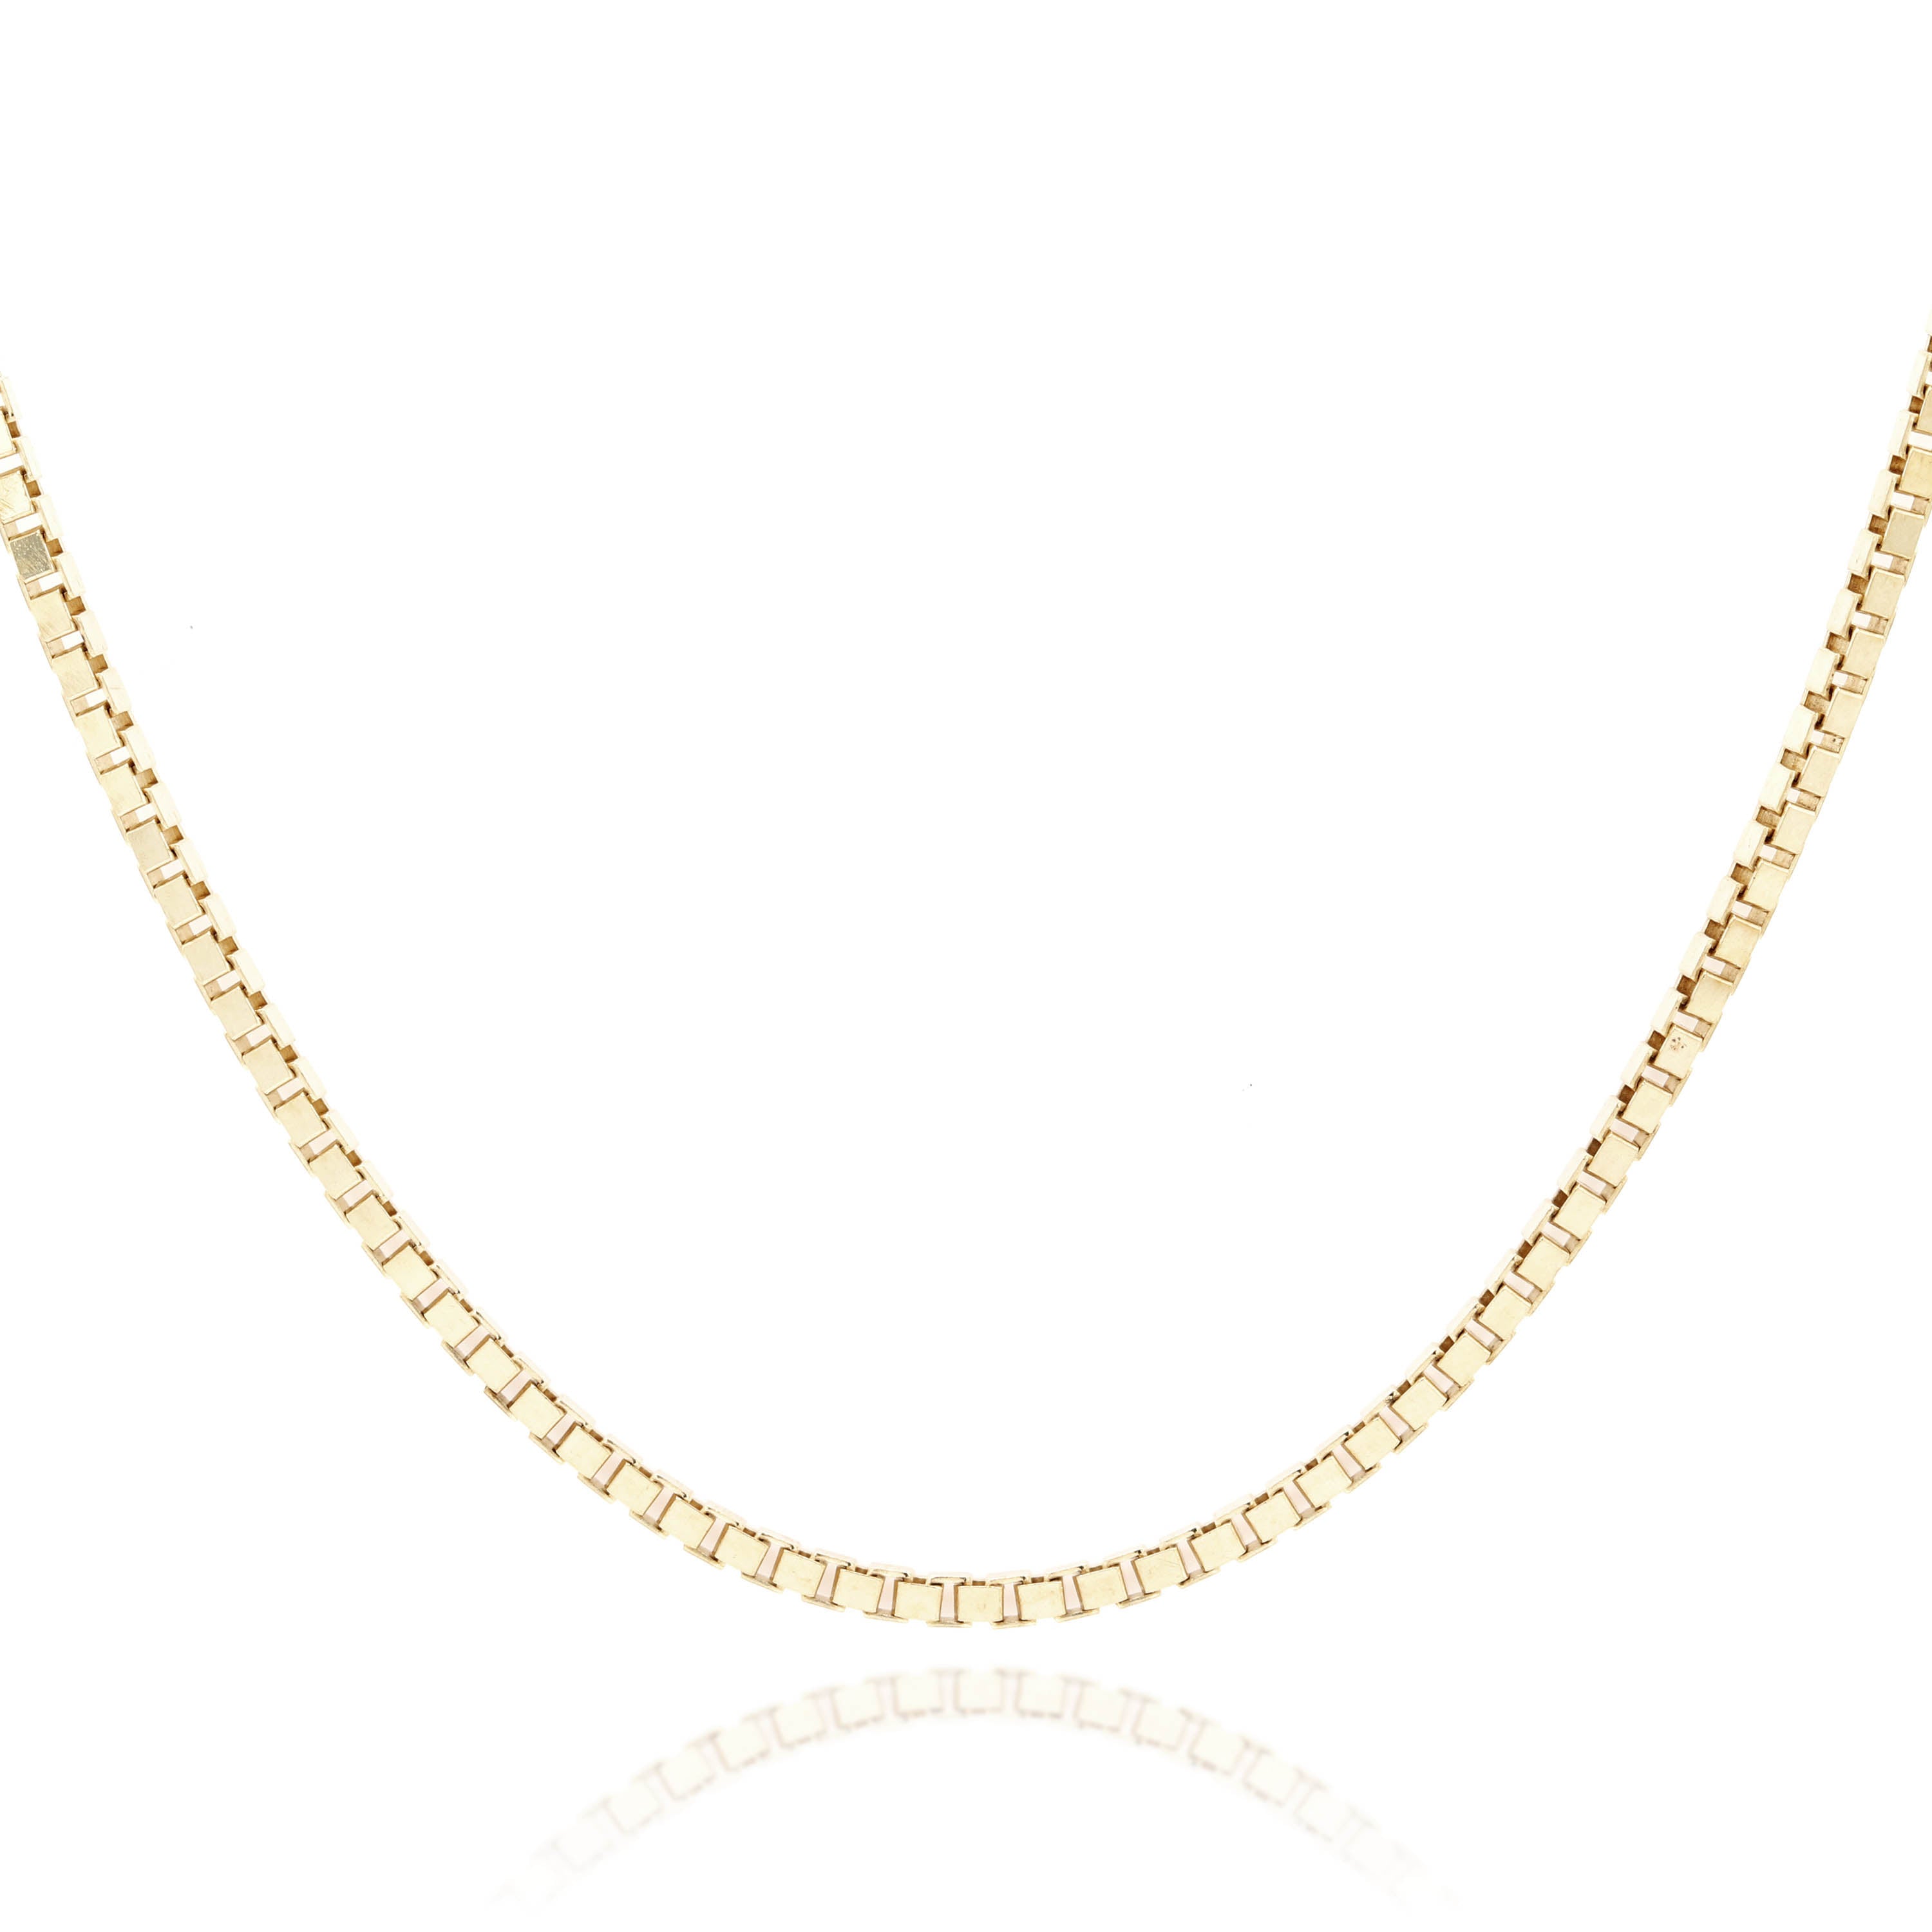 Buy Fine Solid Gold Box Chain, High Quality Stamped Italy 10K & 14K Gold,  Real Gold Pendant Chain Necklace, Dainty Layering Minimalist Chain Online  in India - Etsy